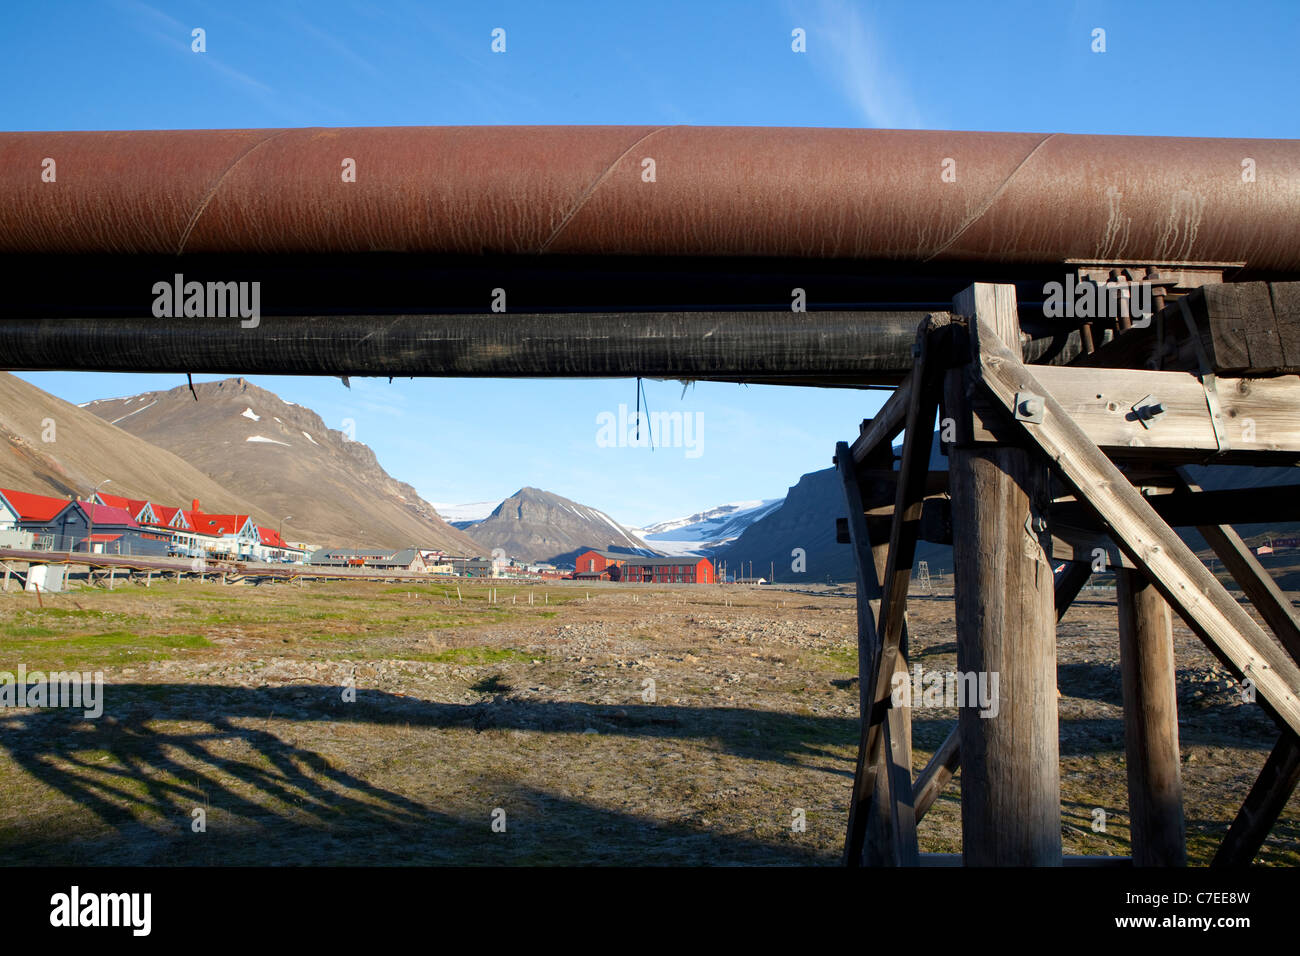 Thermal heating pipes in Longyearbyen, Svalbard. Stock Photo